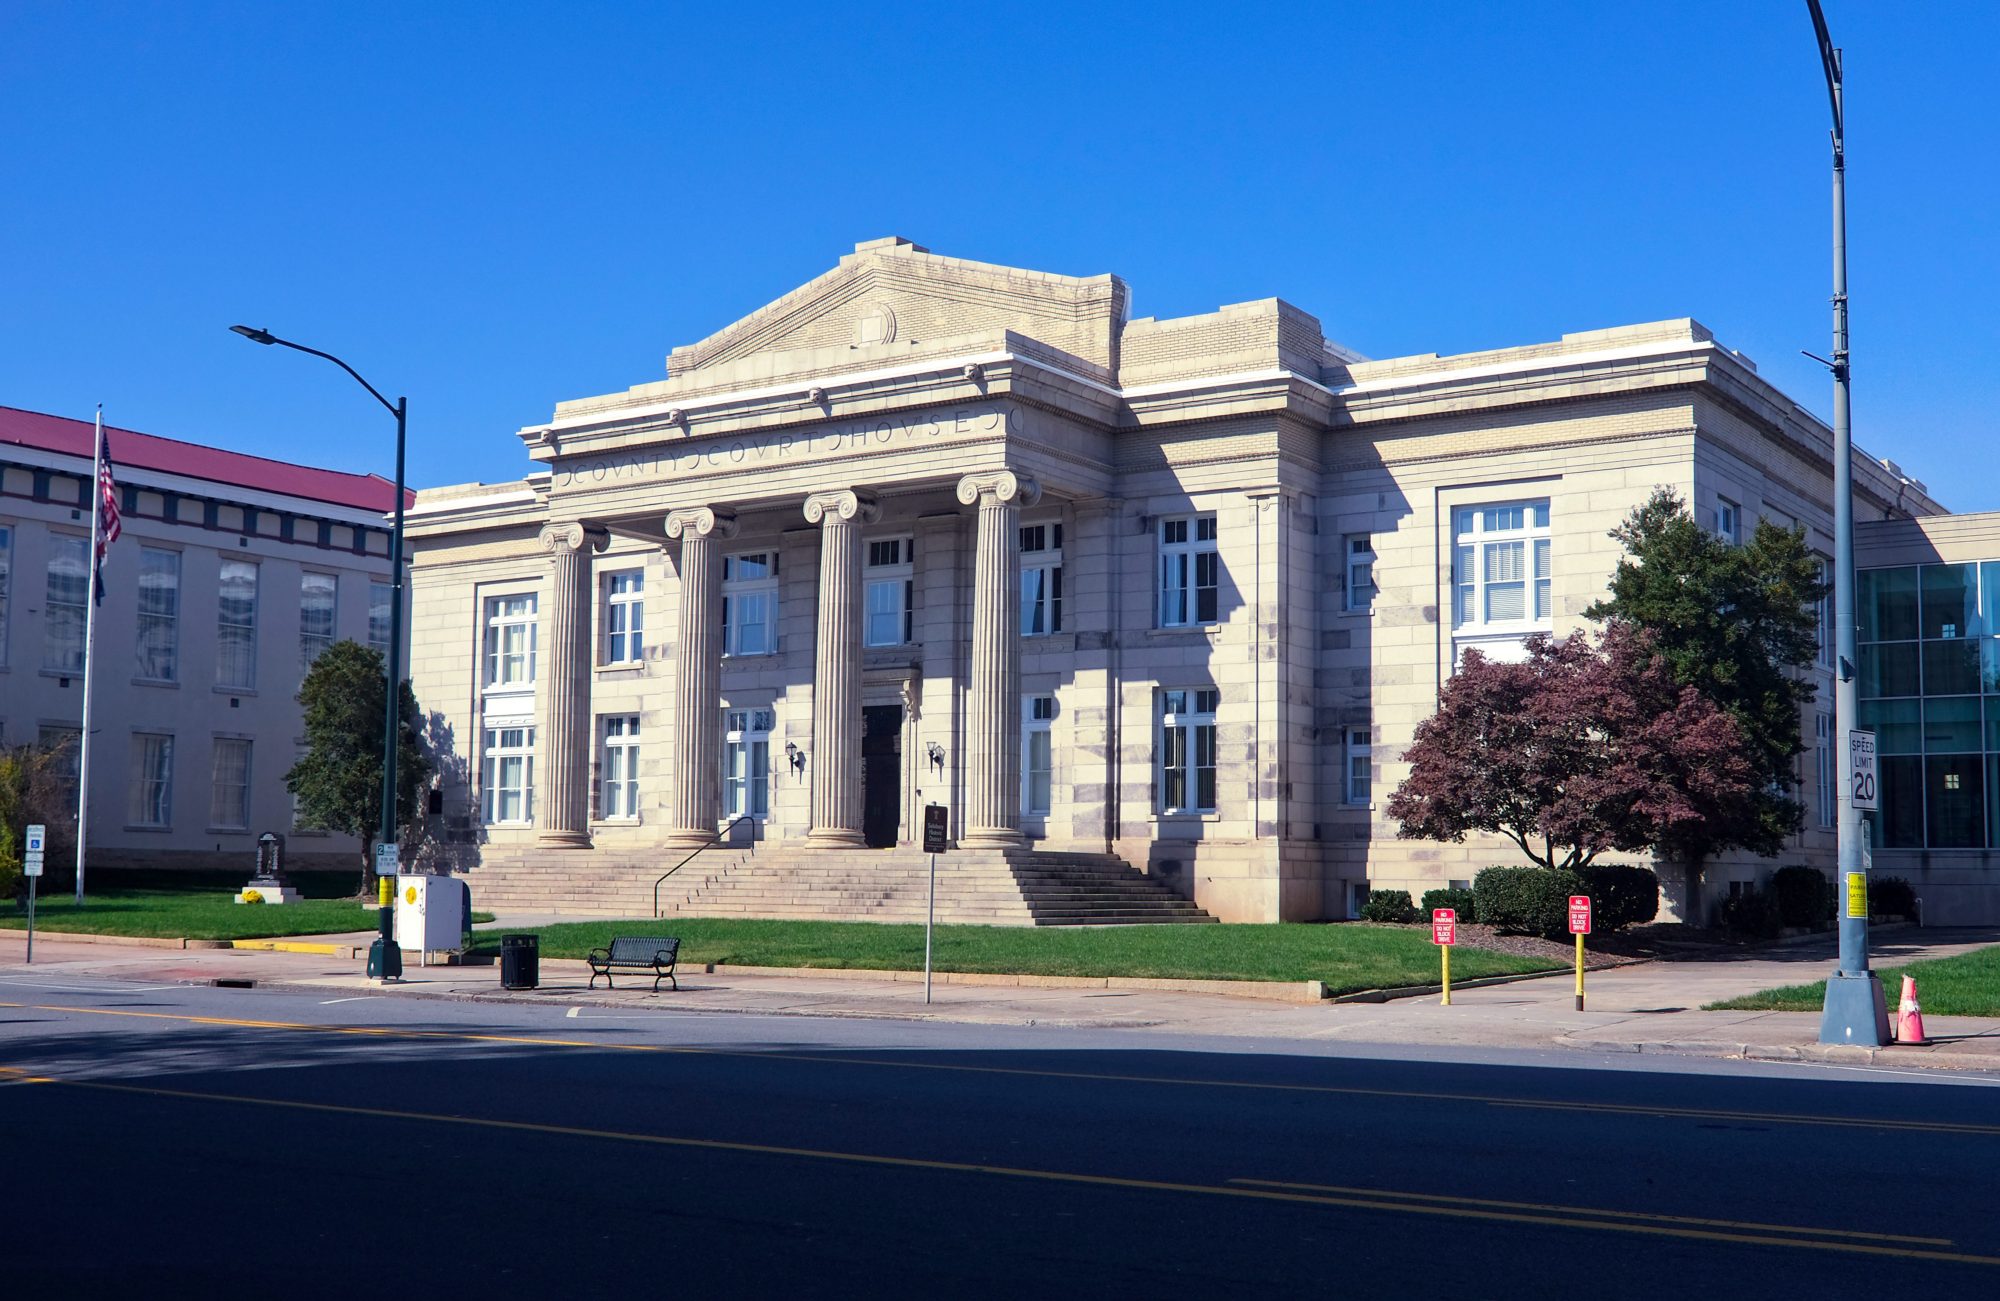 Exterior of the courthouse in Salisbury, NC